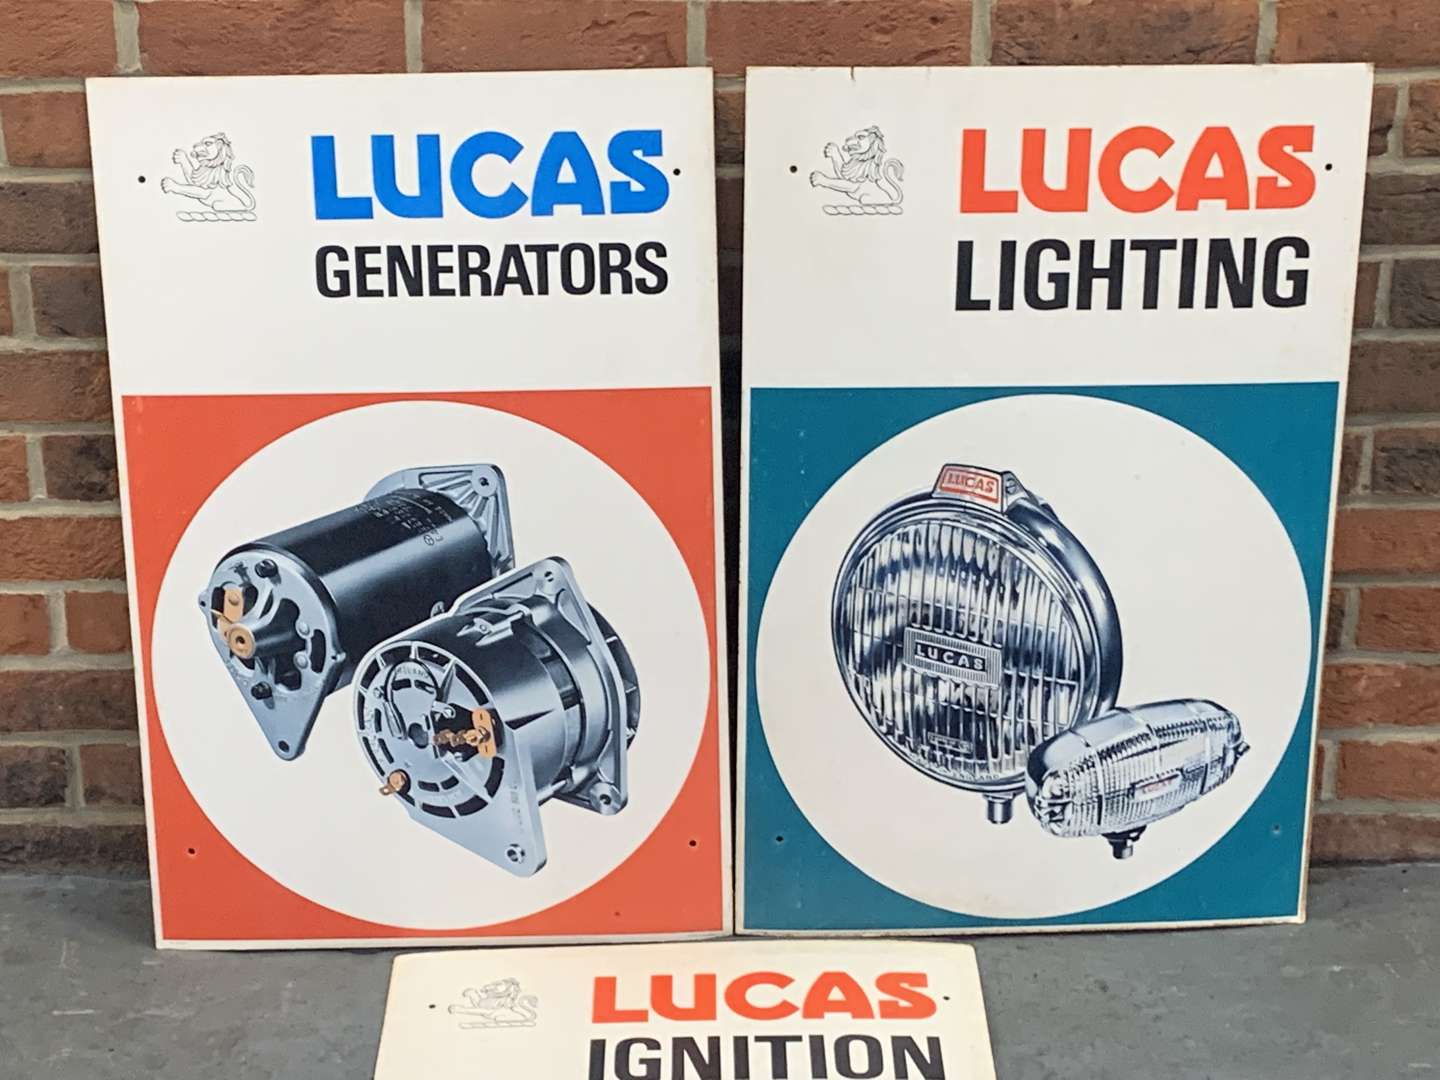 <p>Lucas Generators, Lighting and Ignition Signs on Board</p>